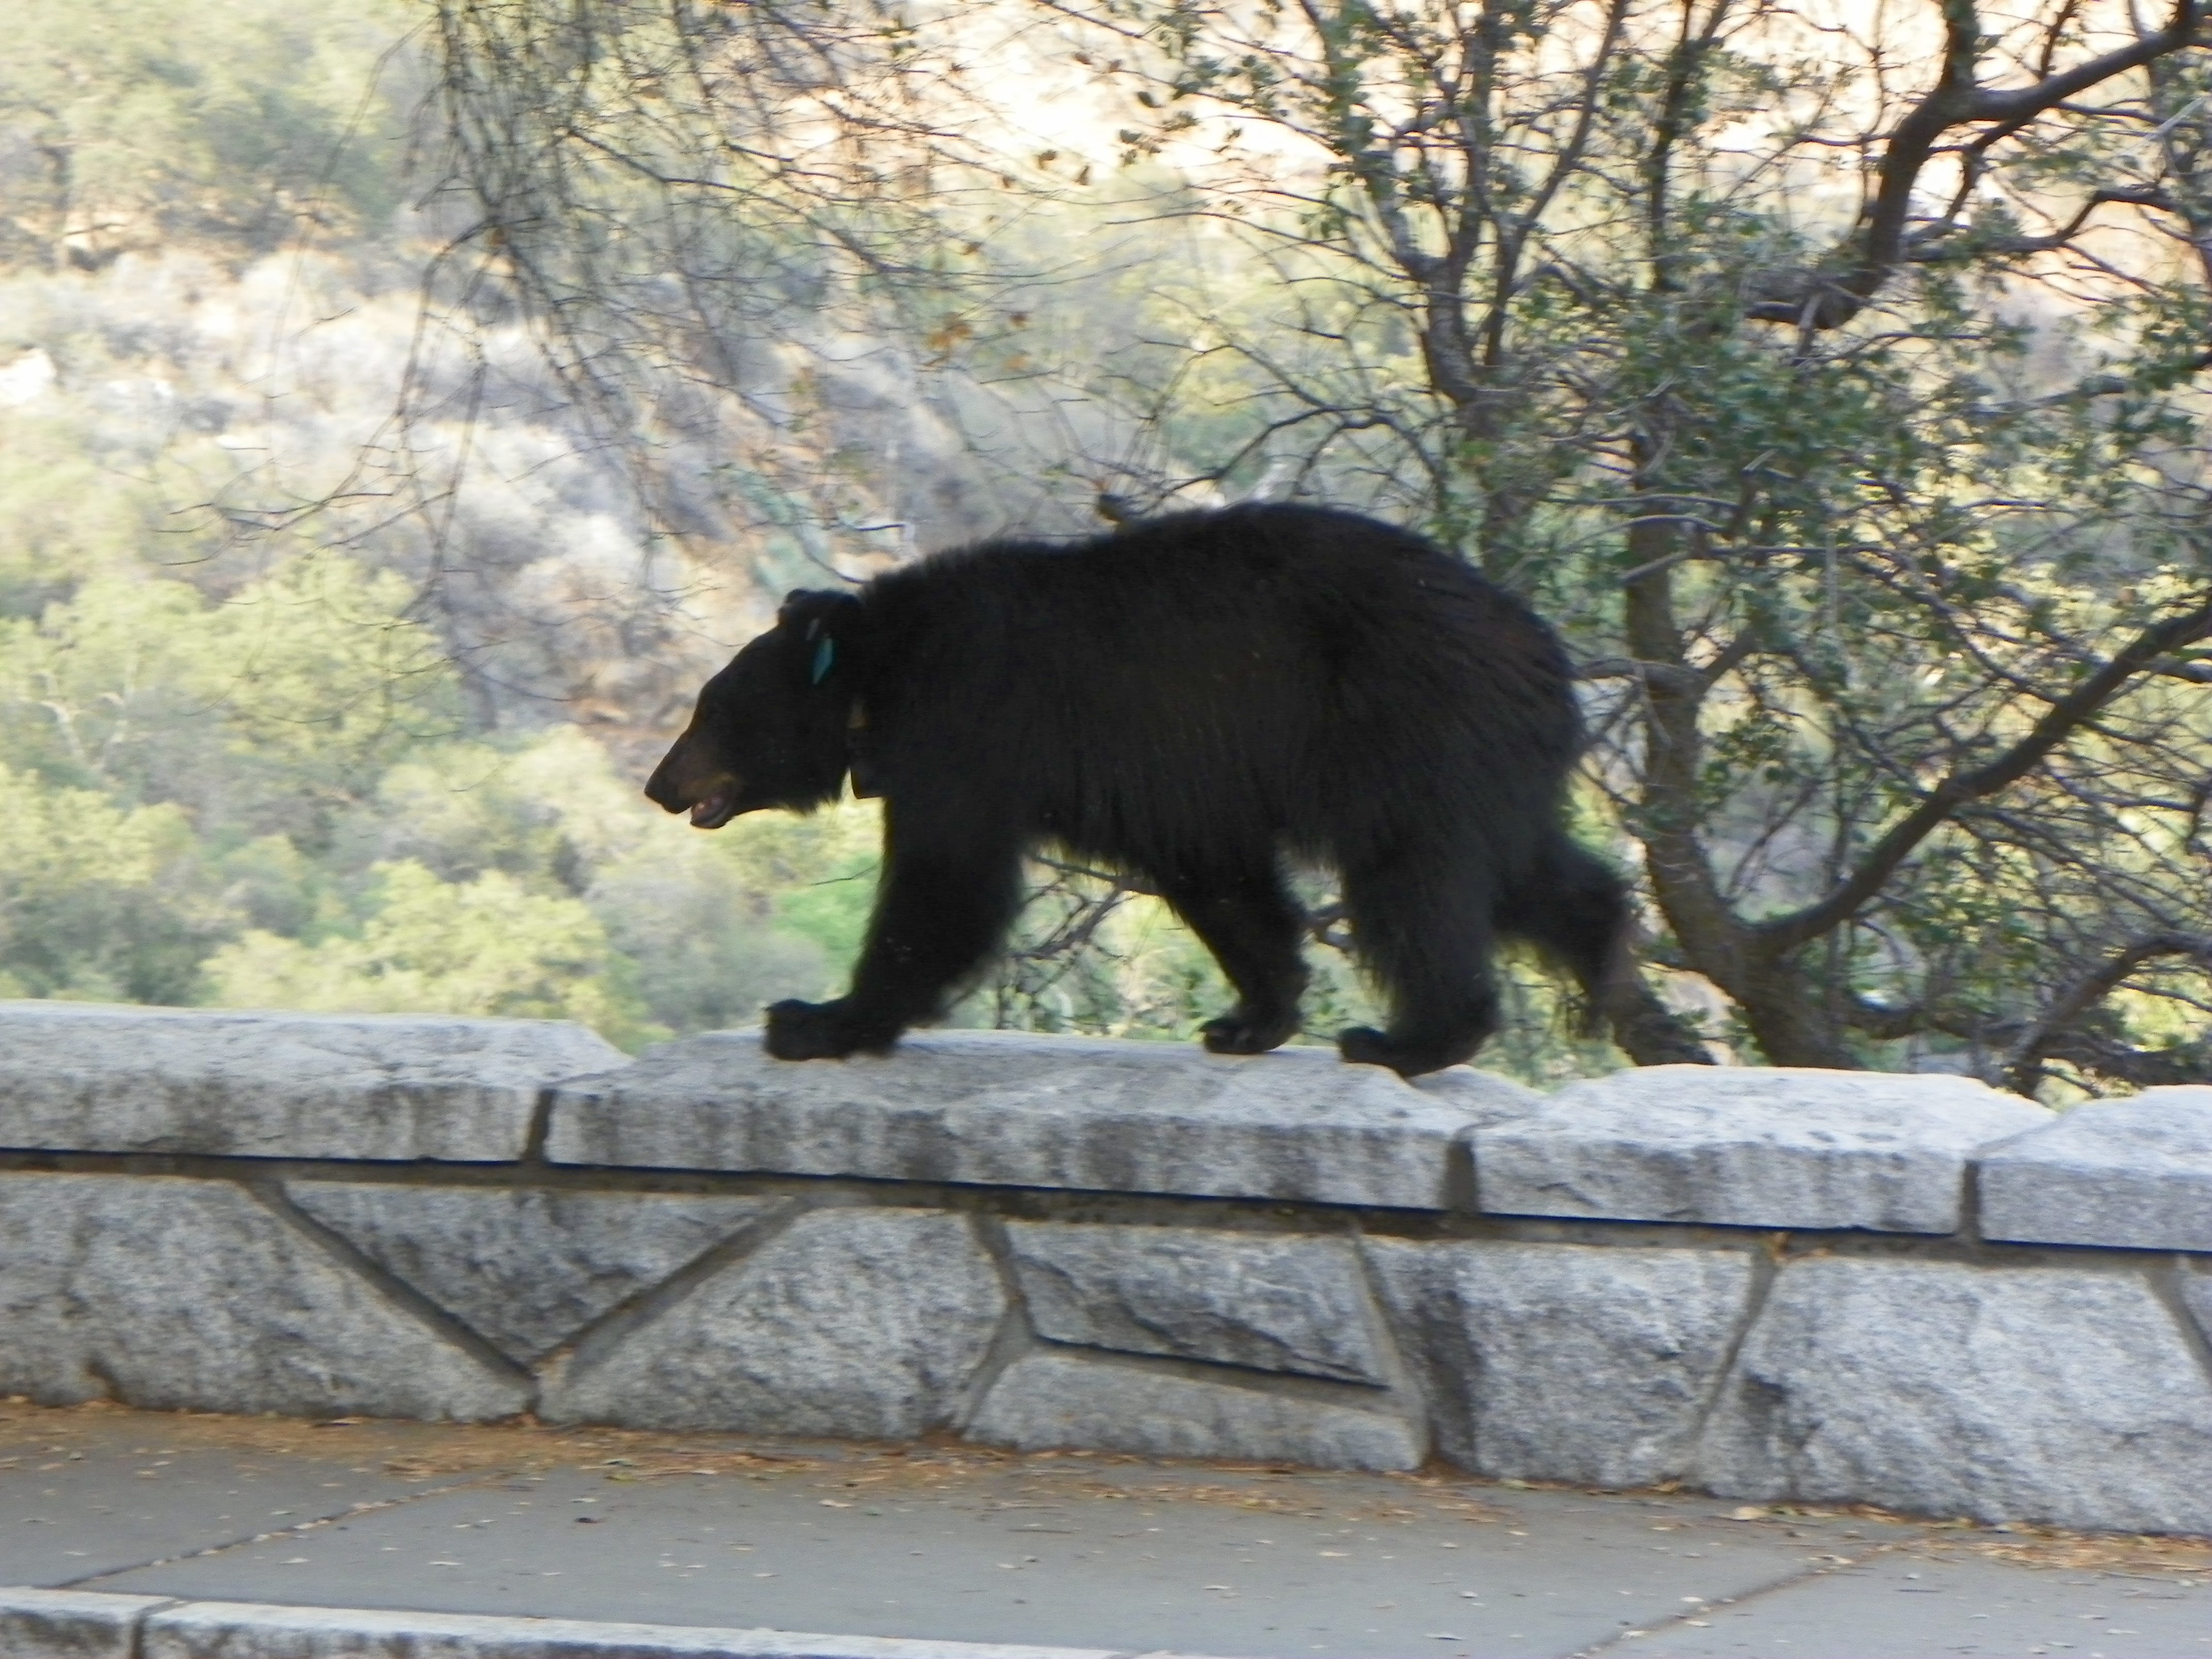 Bear Attacks Continue in This National Park